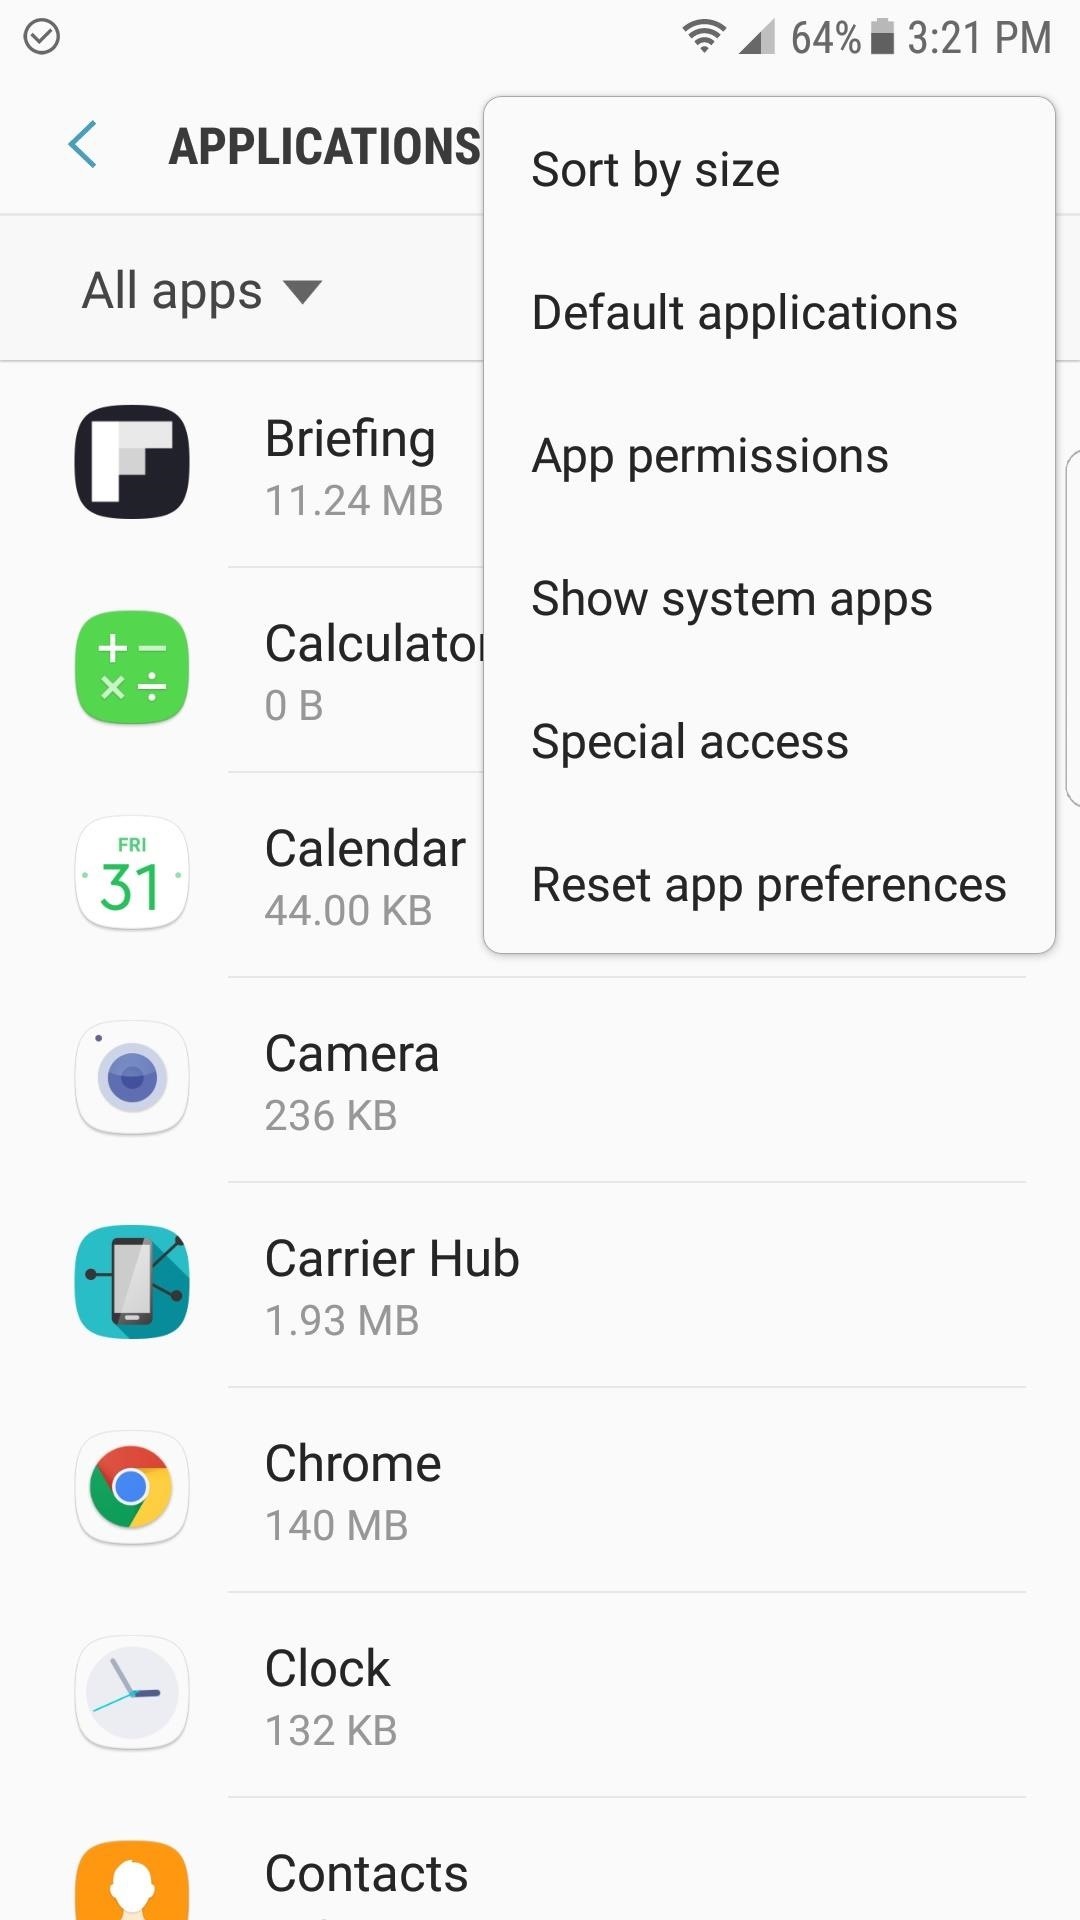 Get the Galaxy S8's Brand New Launcher on Your S7 or S7 Edge—No Root Needed